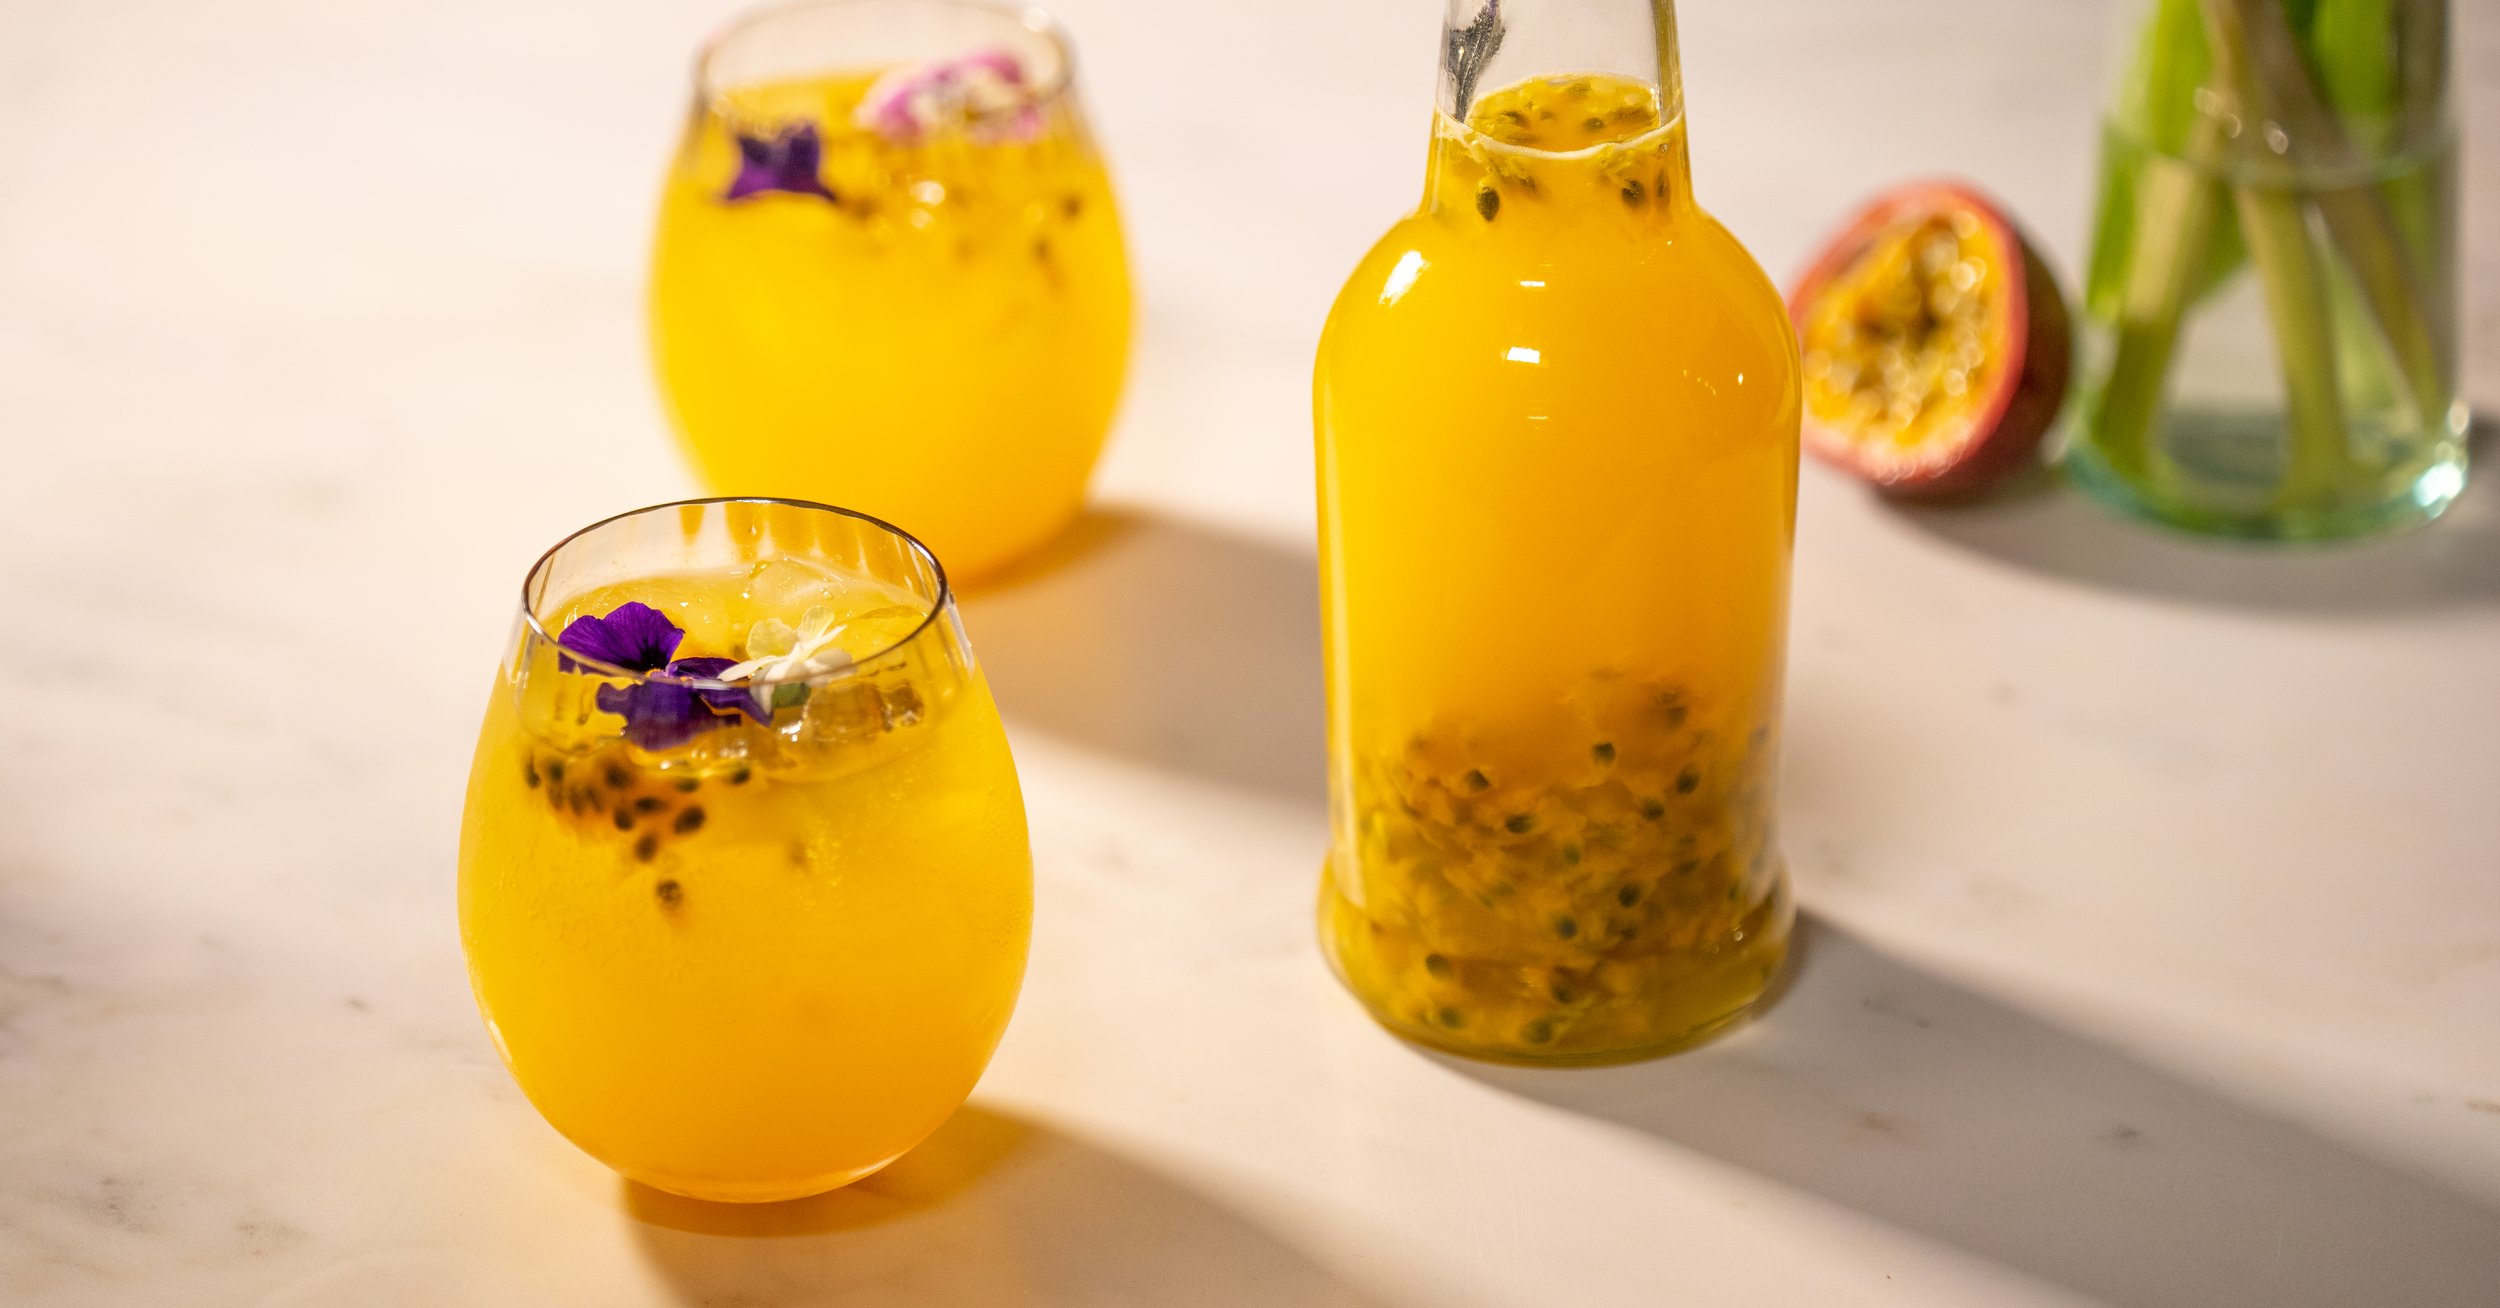 Heres how to make your own gorgeous passion fruit gin at home — Craft Gin Club The UKs No.1 gin club